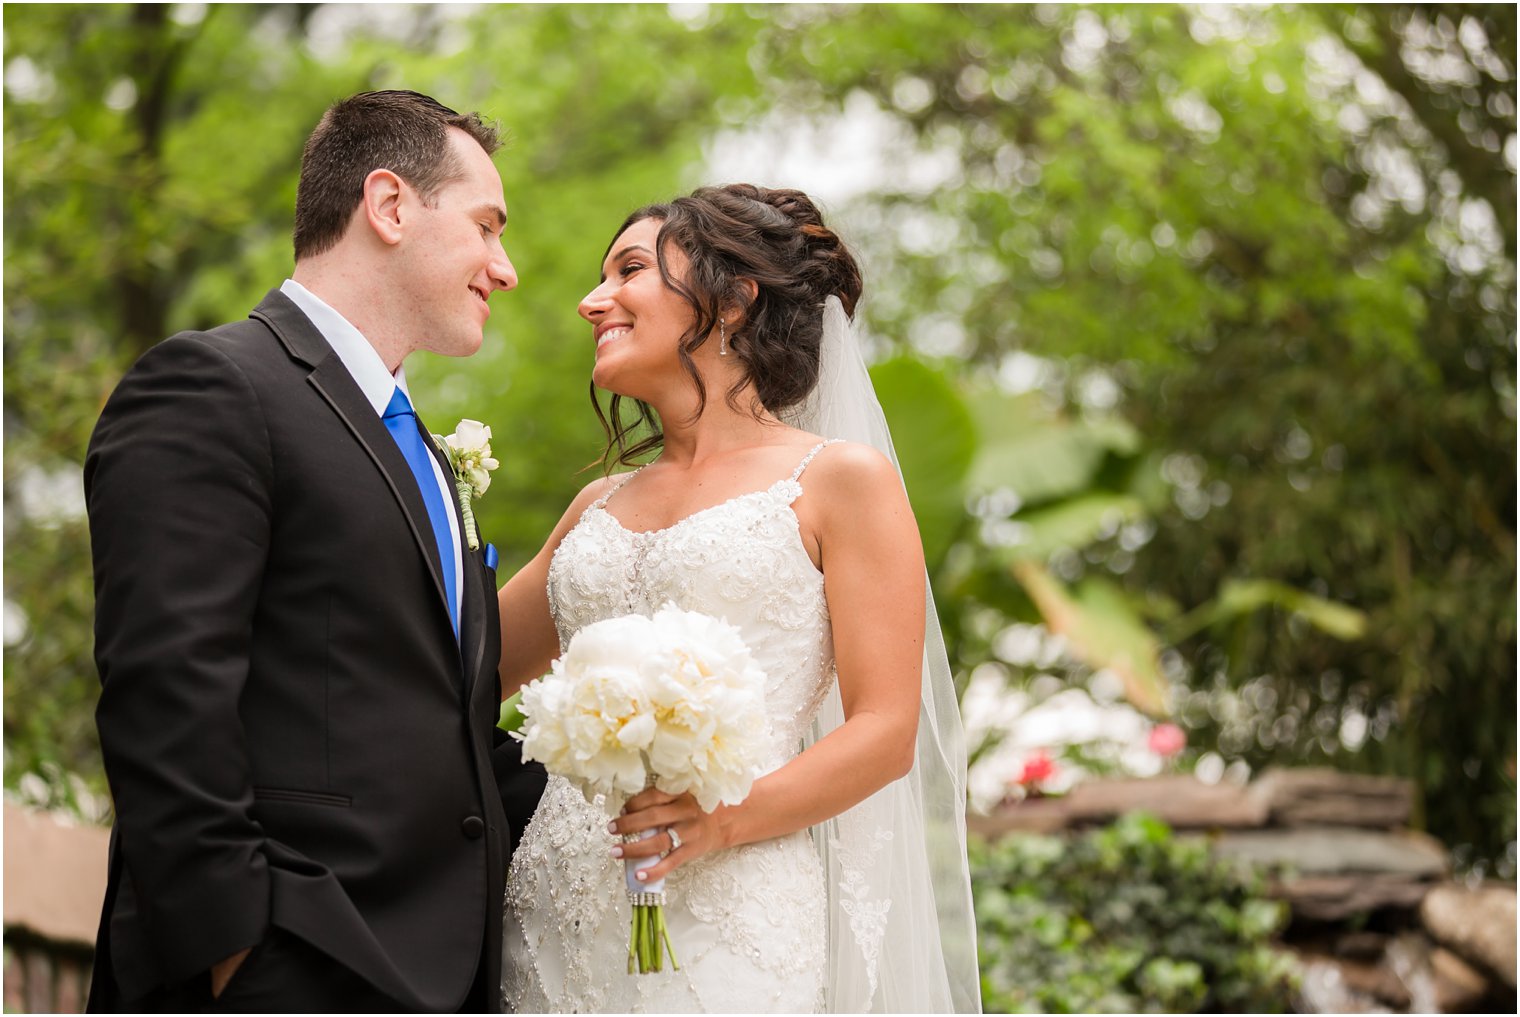 Outdoor bride and groom photos at il Tulipano